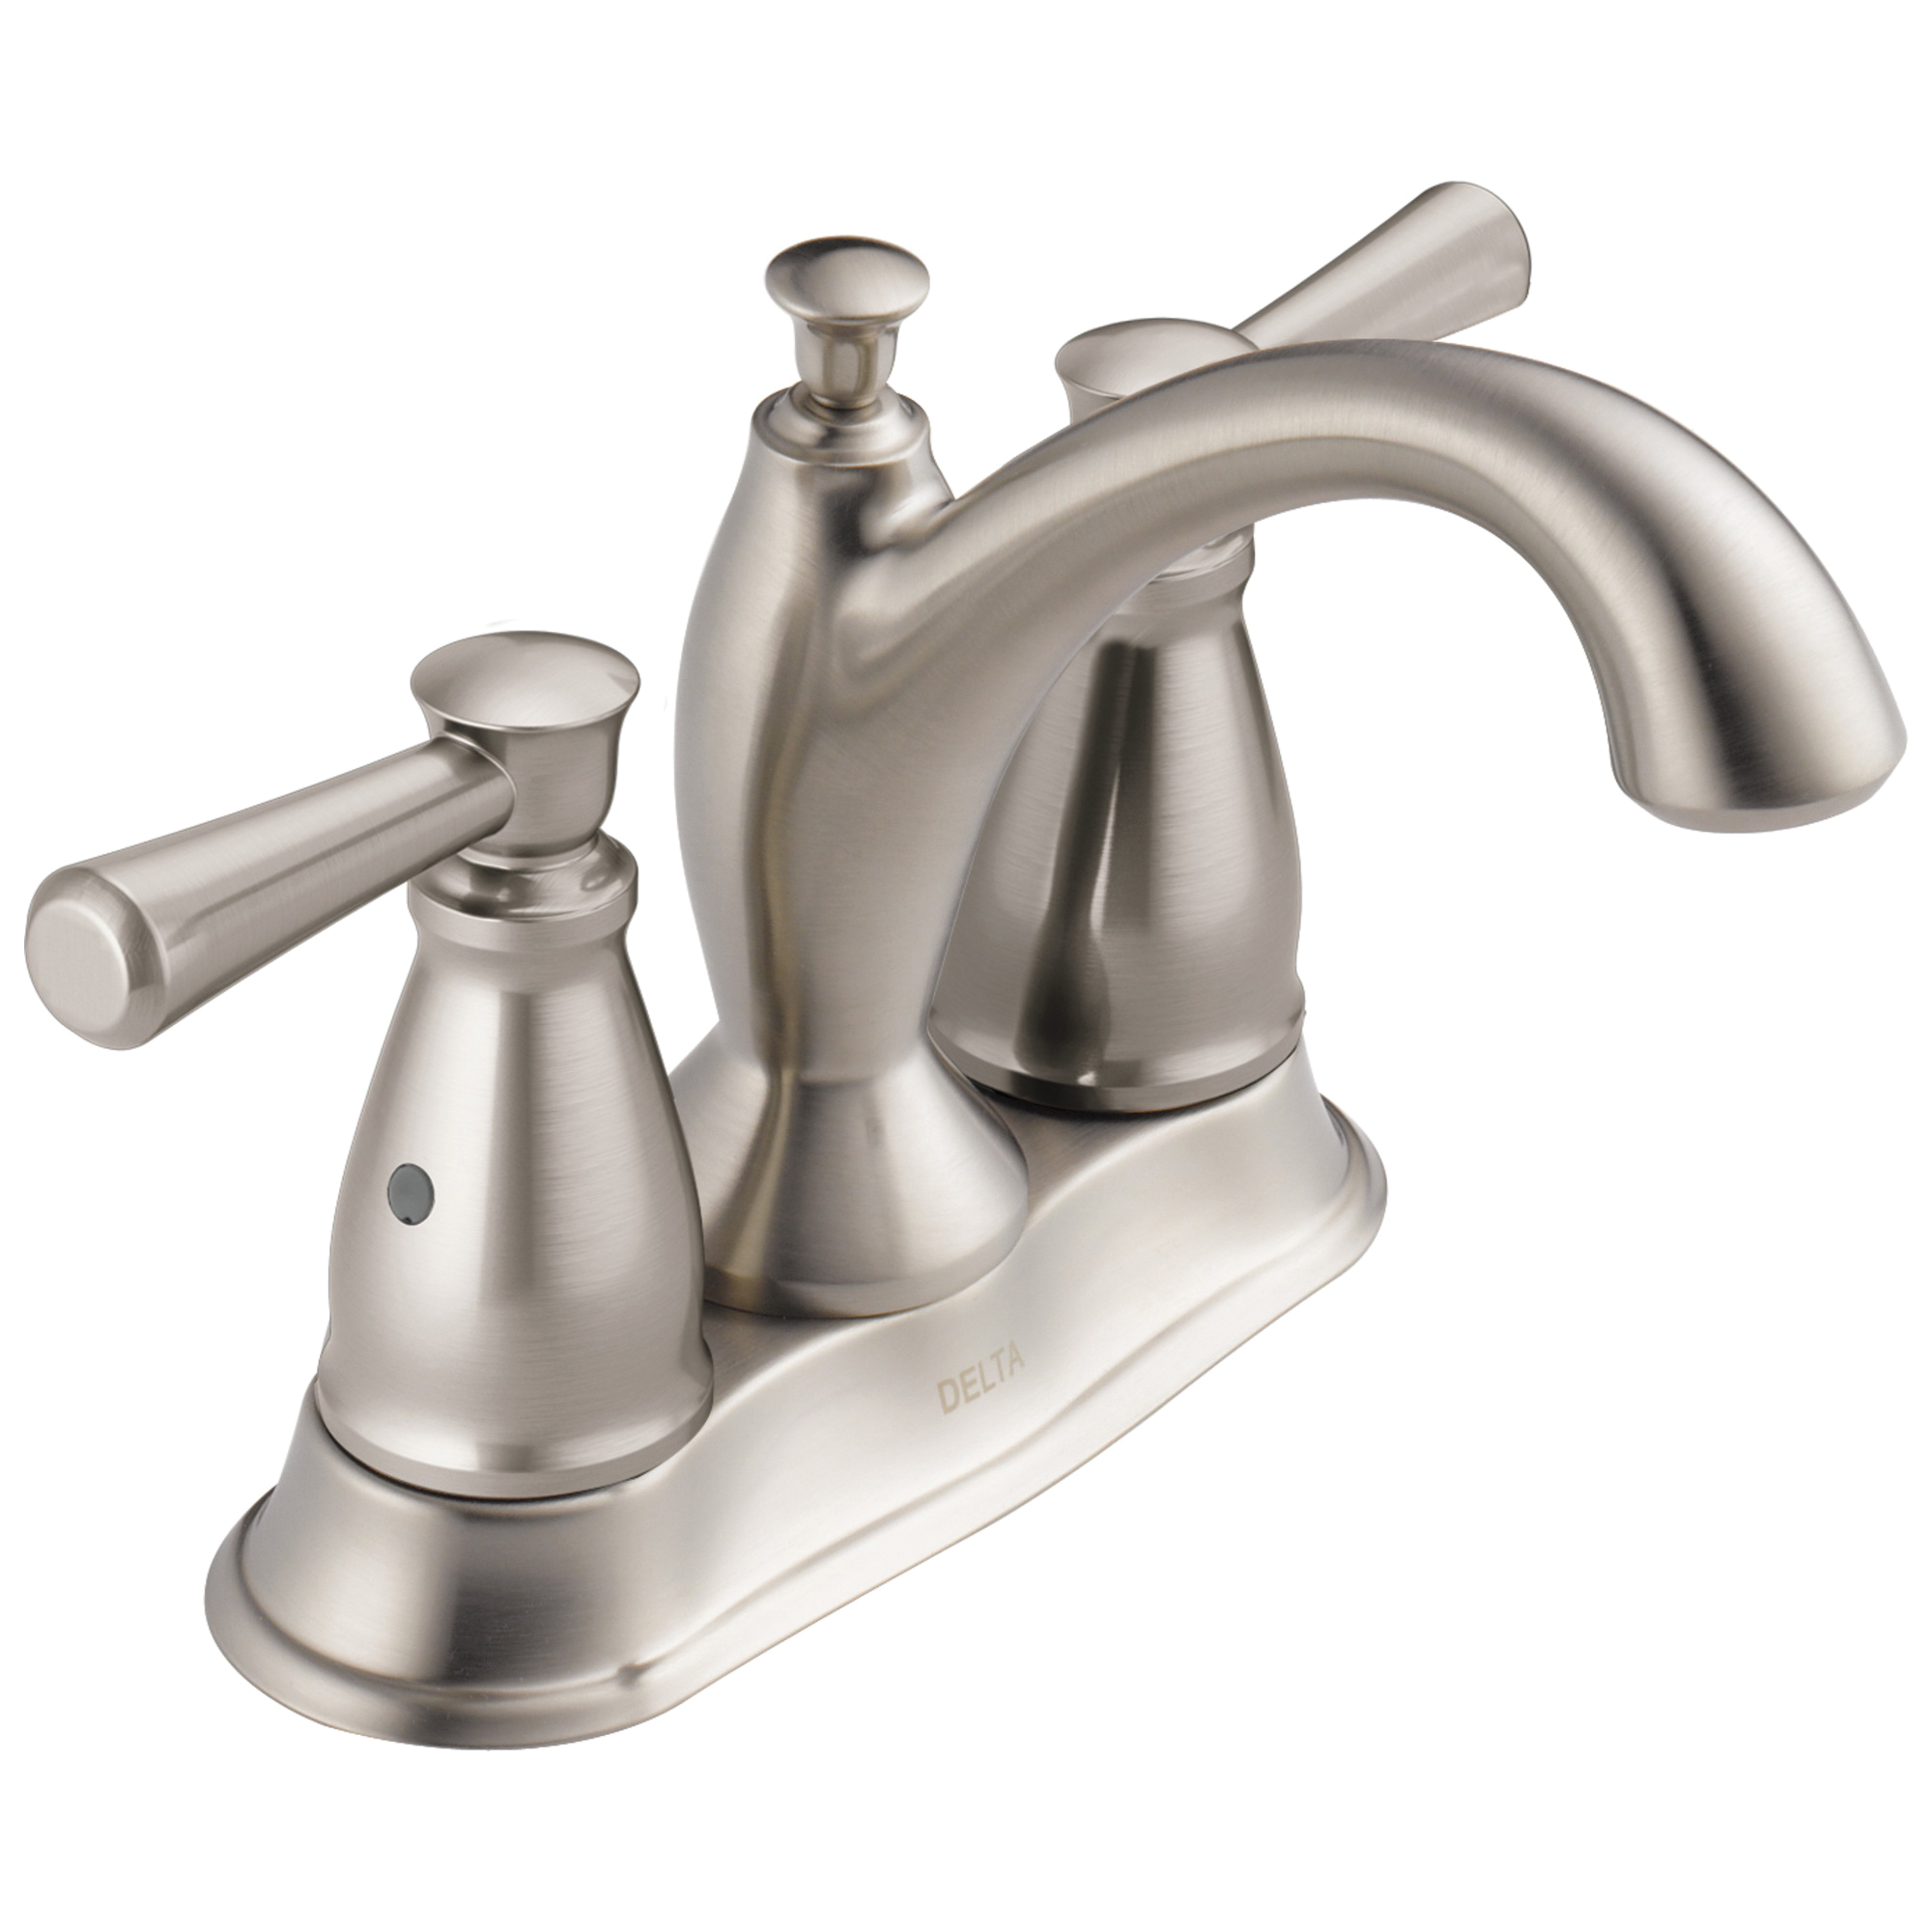 DELTA® 2593-SSTP-DST Tract-Pack™ Centerset Lavatory Faucet, Linden™, Stainless Steel, 2 Handles, 50/50 Pop-Up Drain, 1.2 gpm